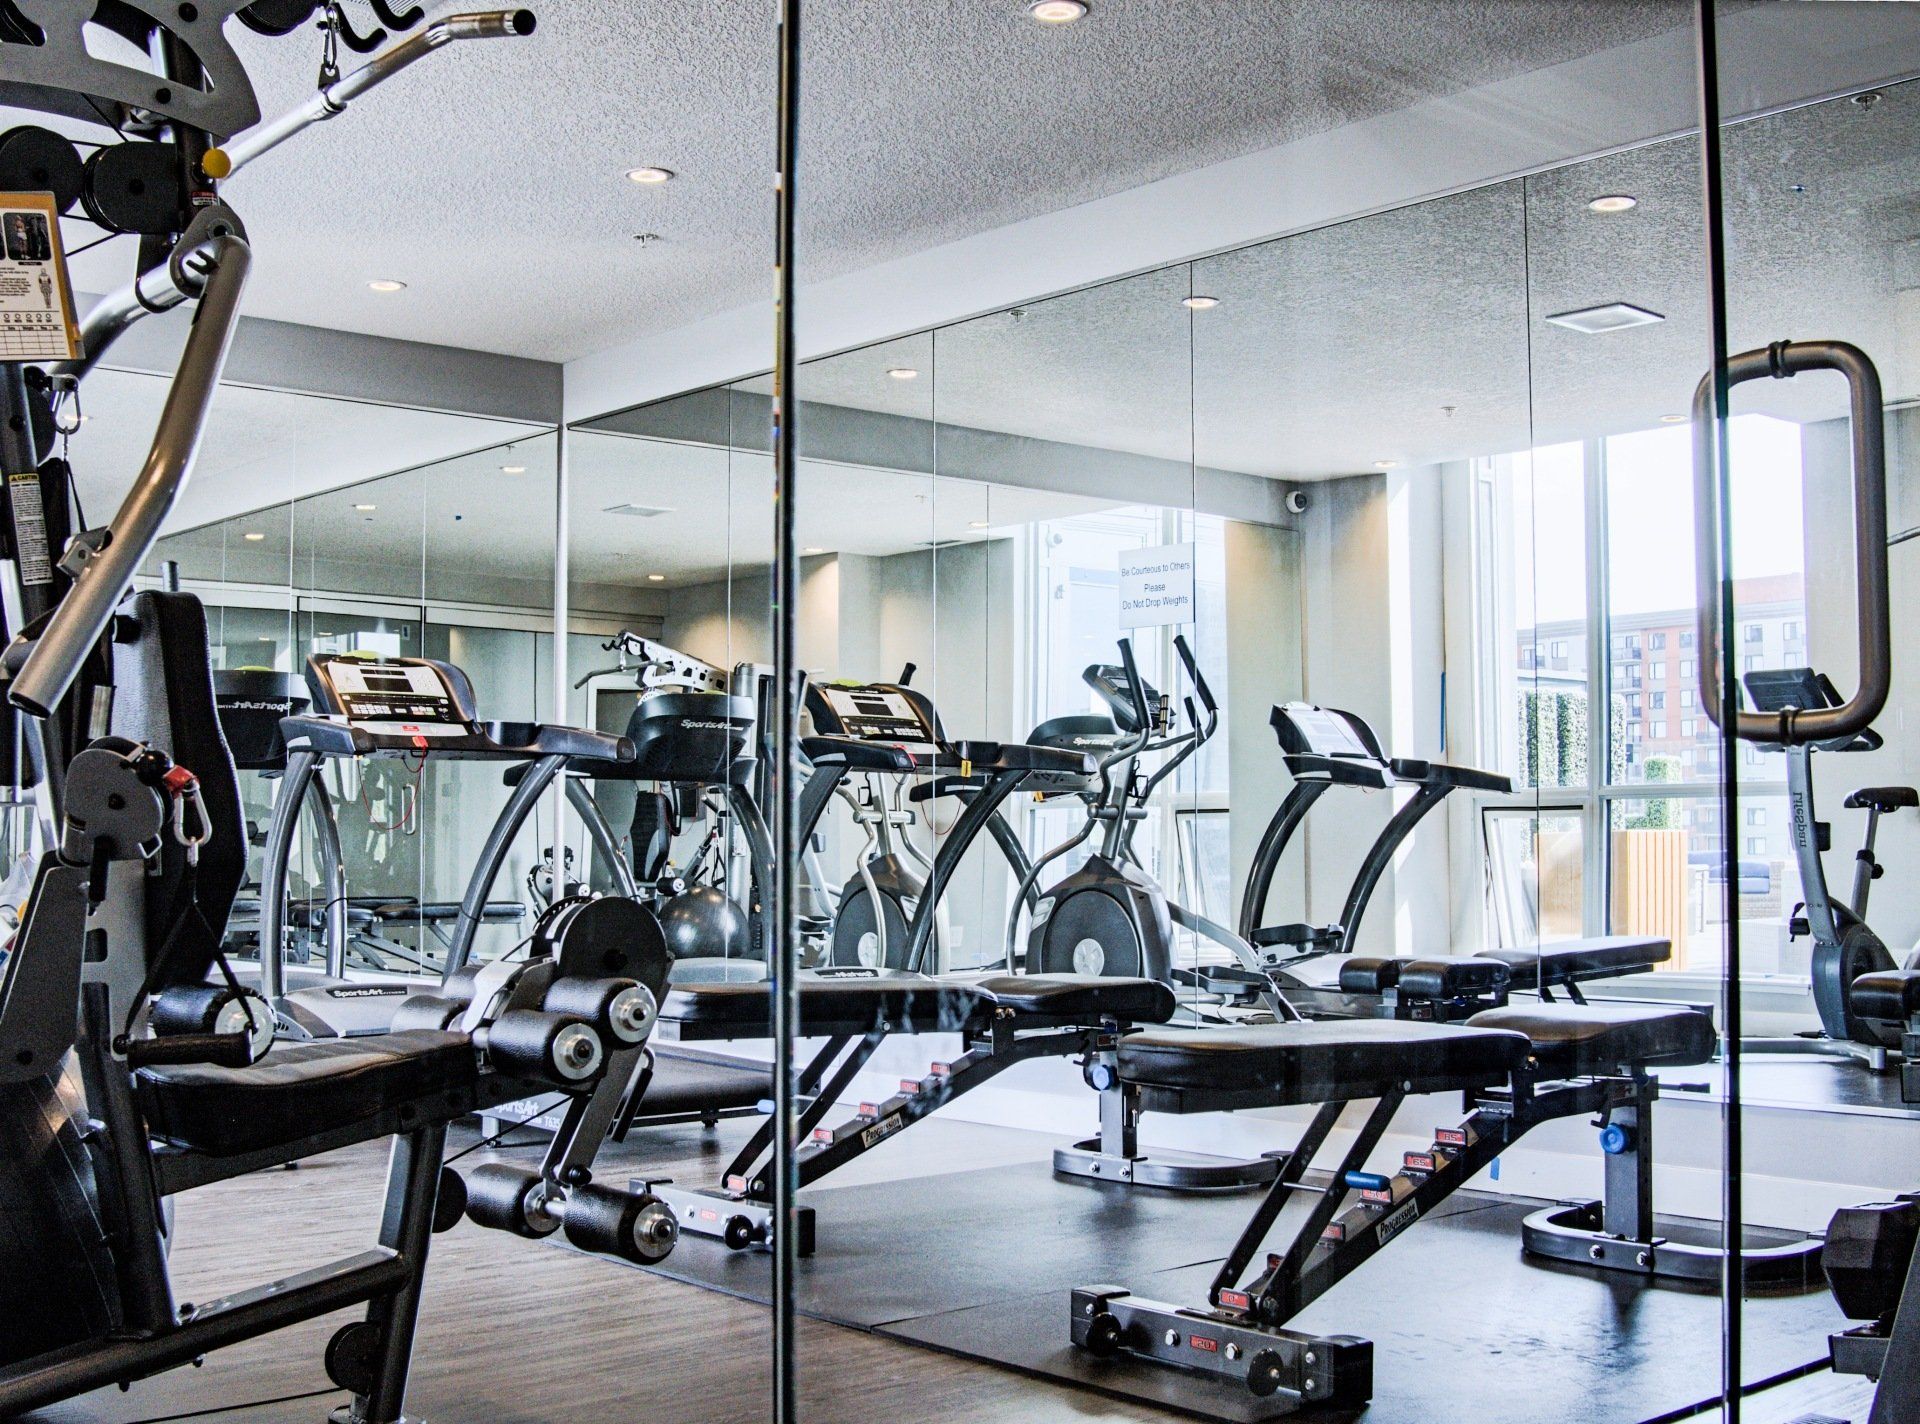 Fitness centre with Treadmills benches and elliptical trainers